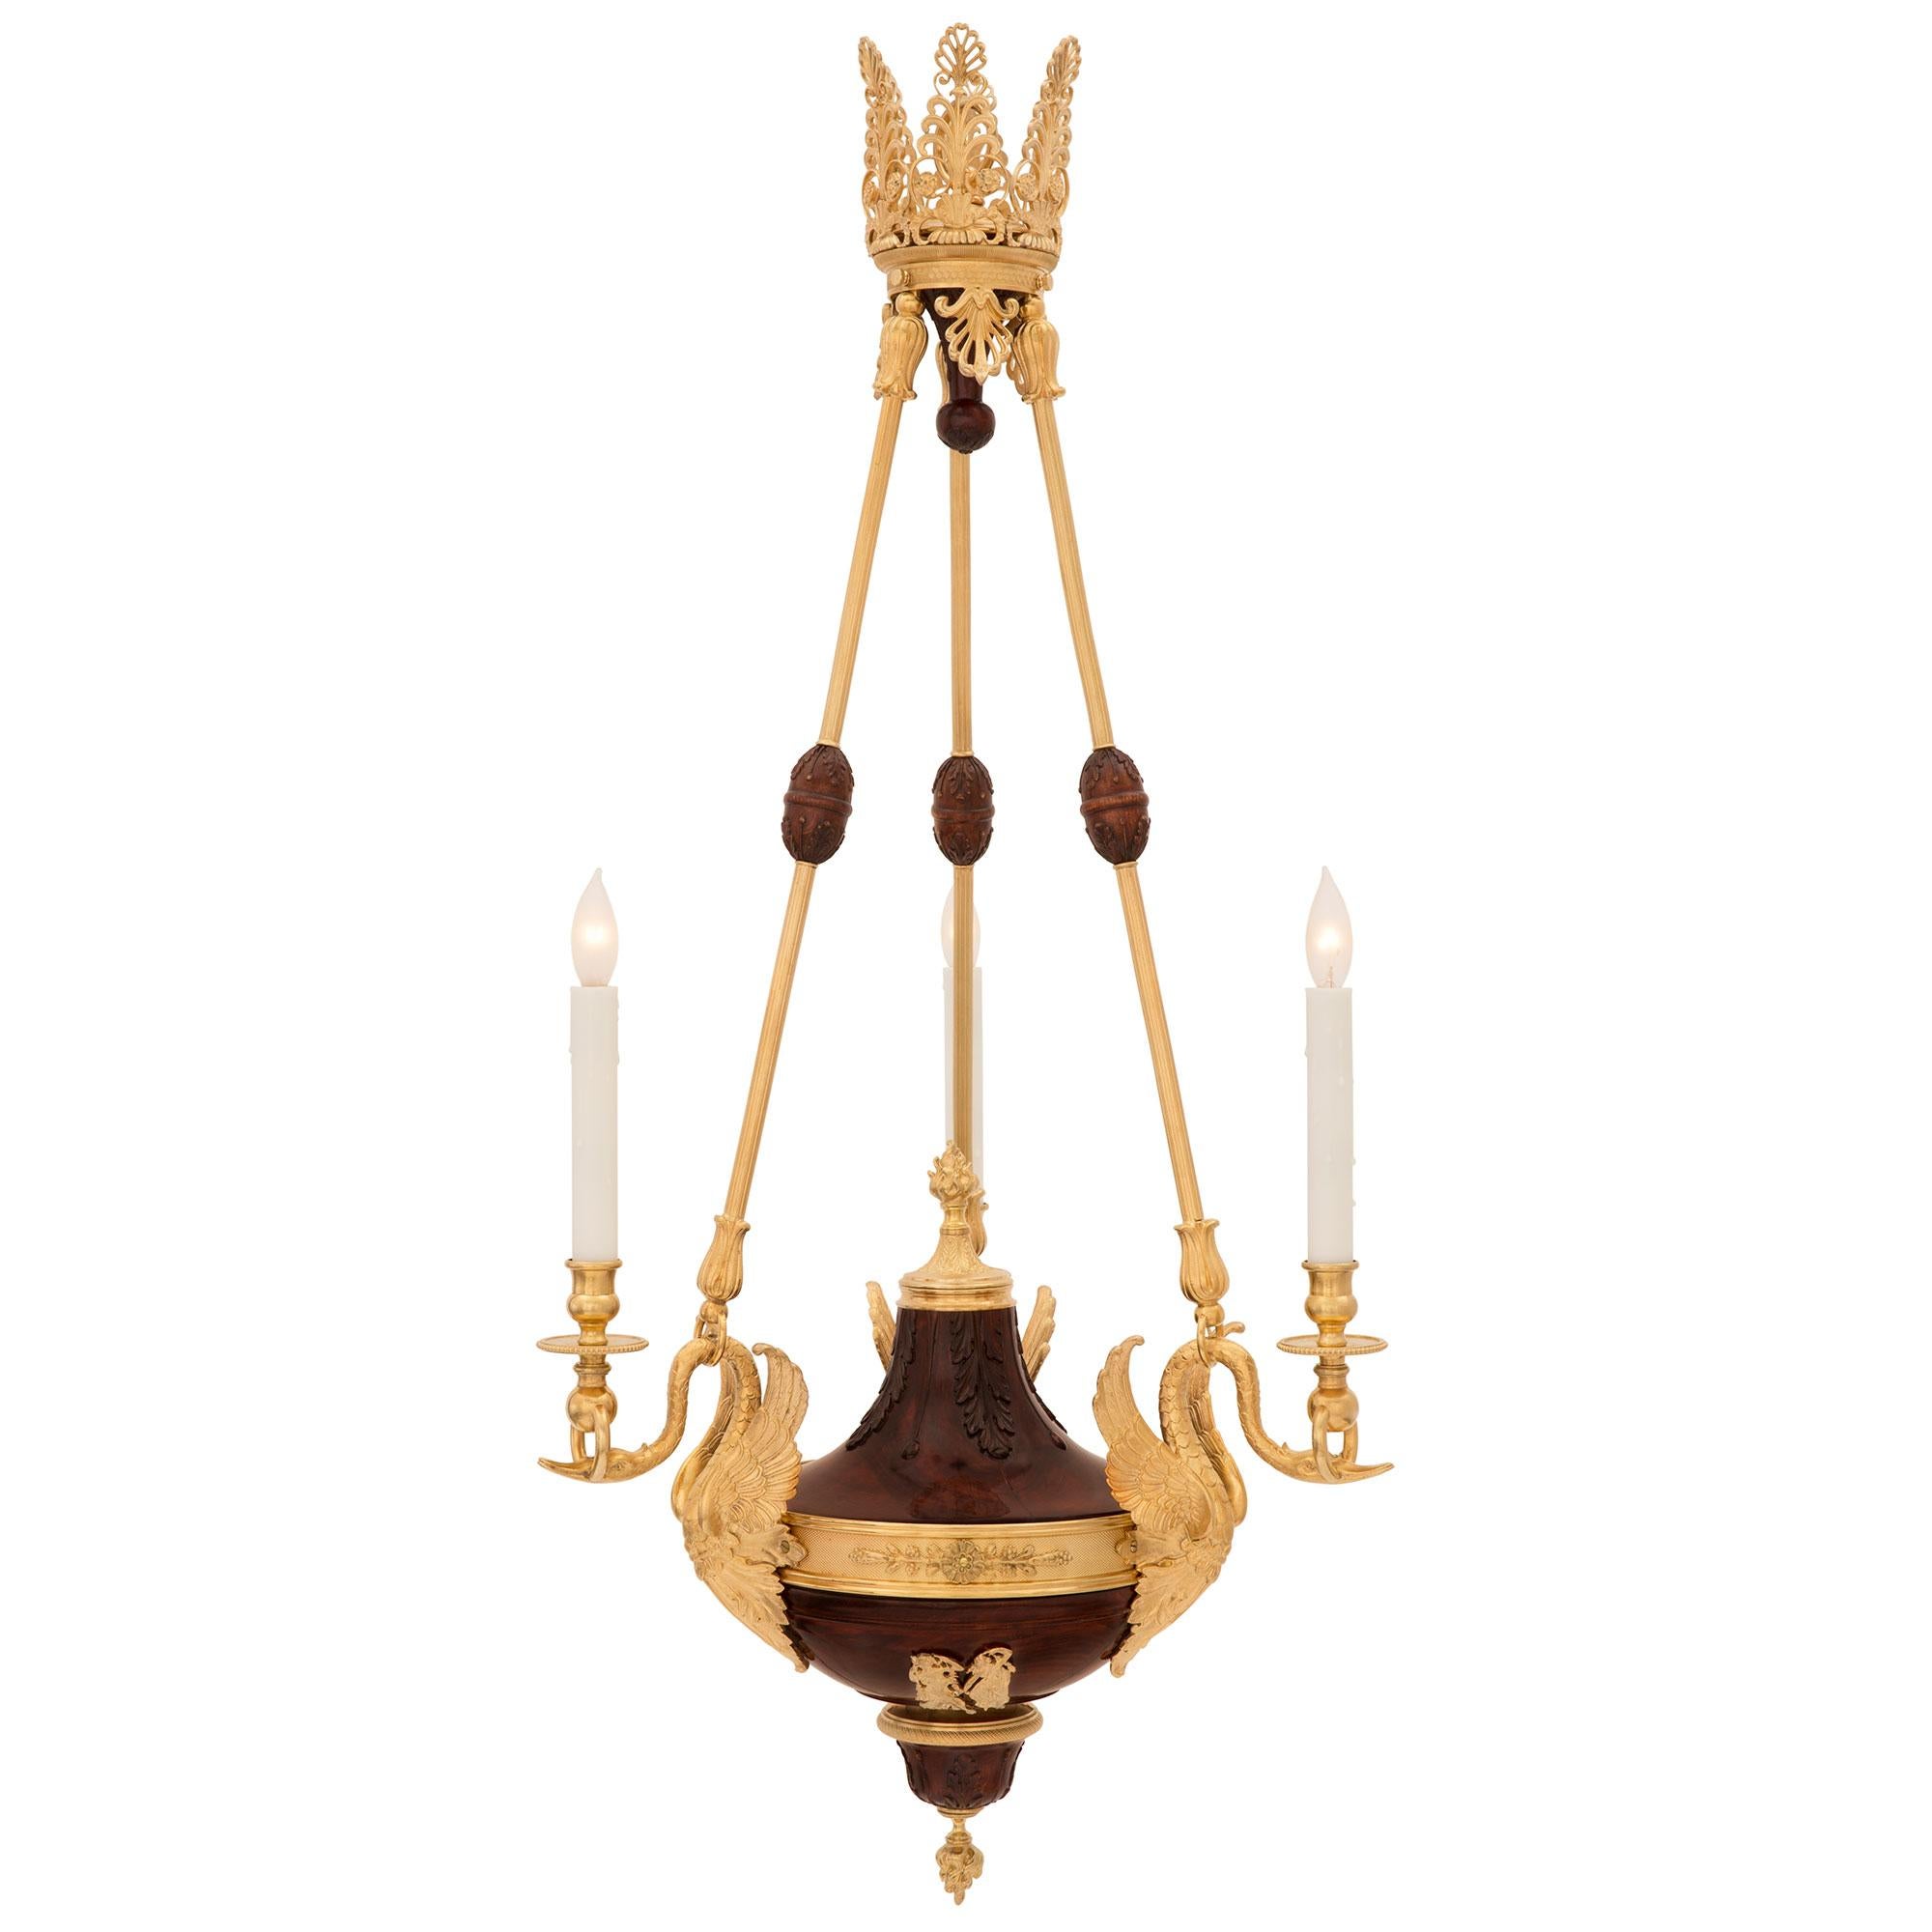 An exceptional French 19th century Neo-Classical st. maple and ormolu chandelier. The chandelier is centered by a fine bottom inverted finial of the eternal flame amidst carved maple acanthus leaves and an elegant wrap around ormolu band. At the